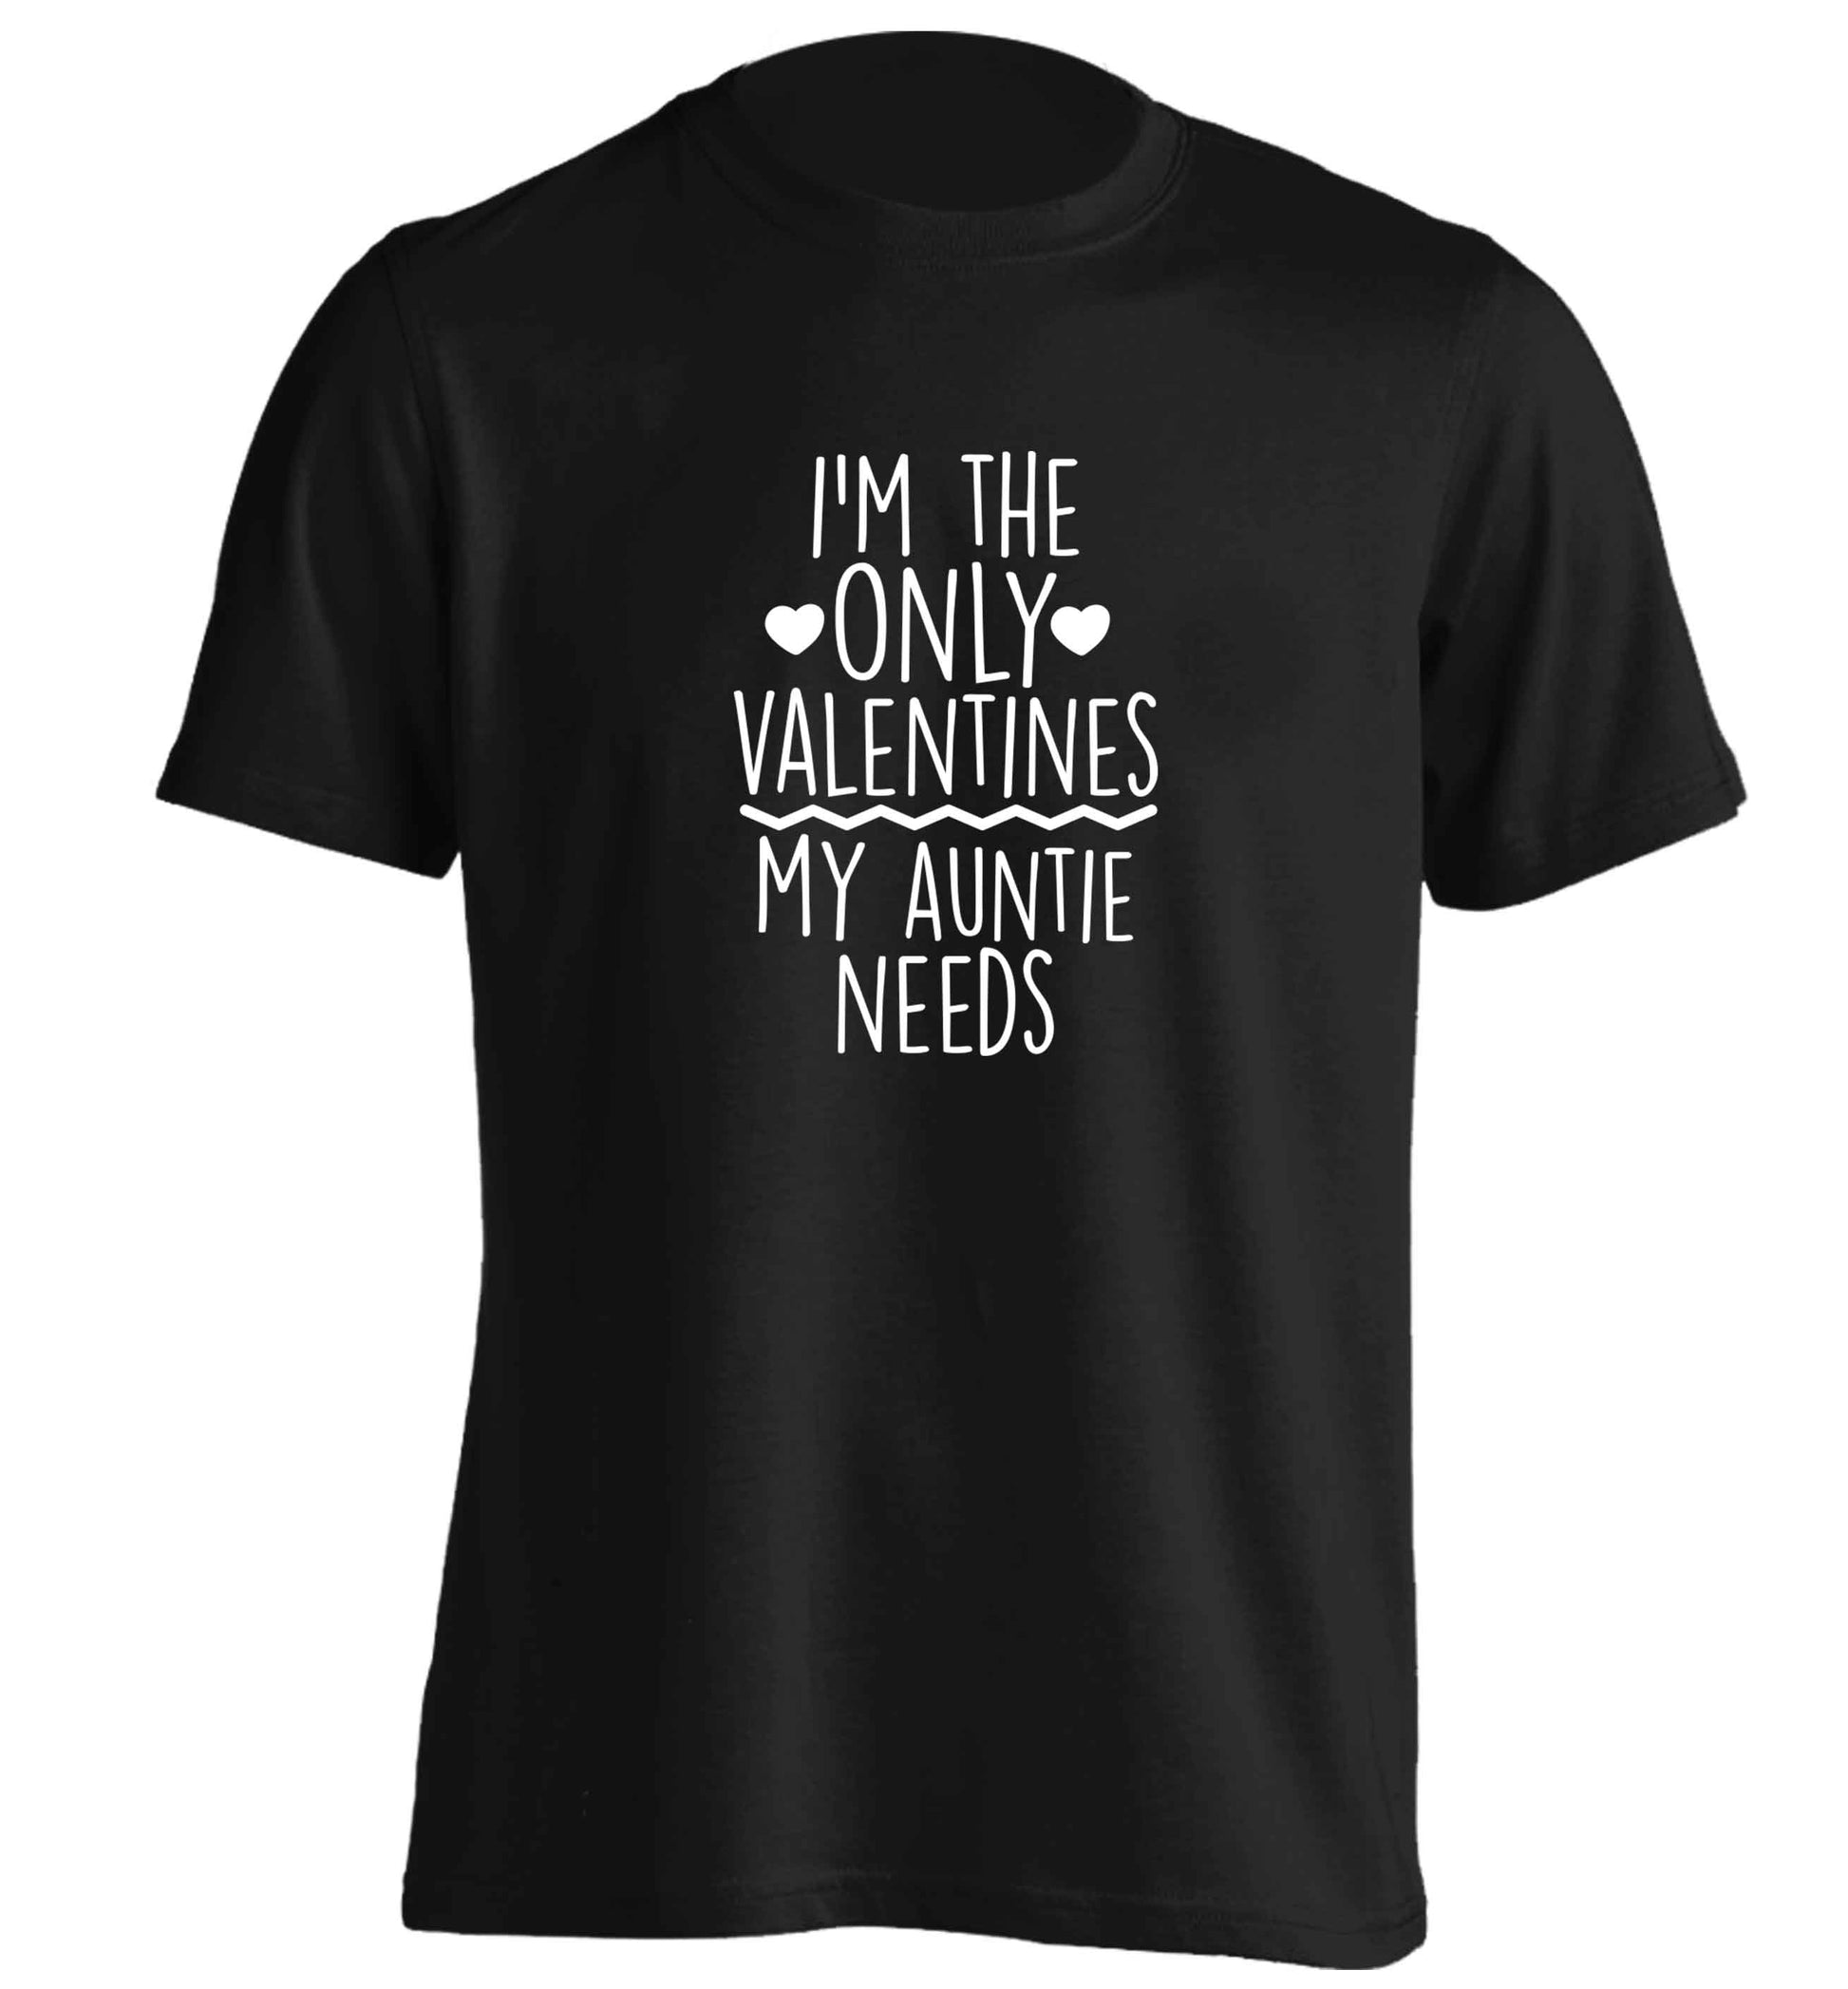 I'm the only valentines my auntie needs adults unisex black Tshirt 2XL